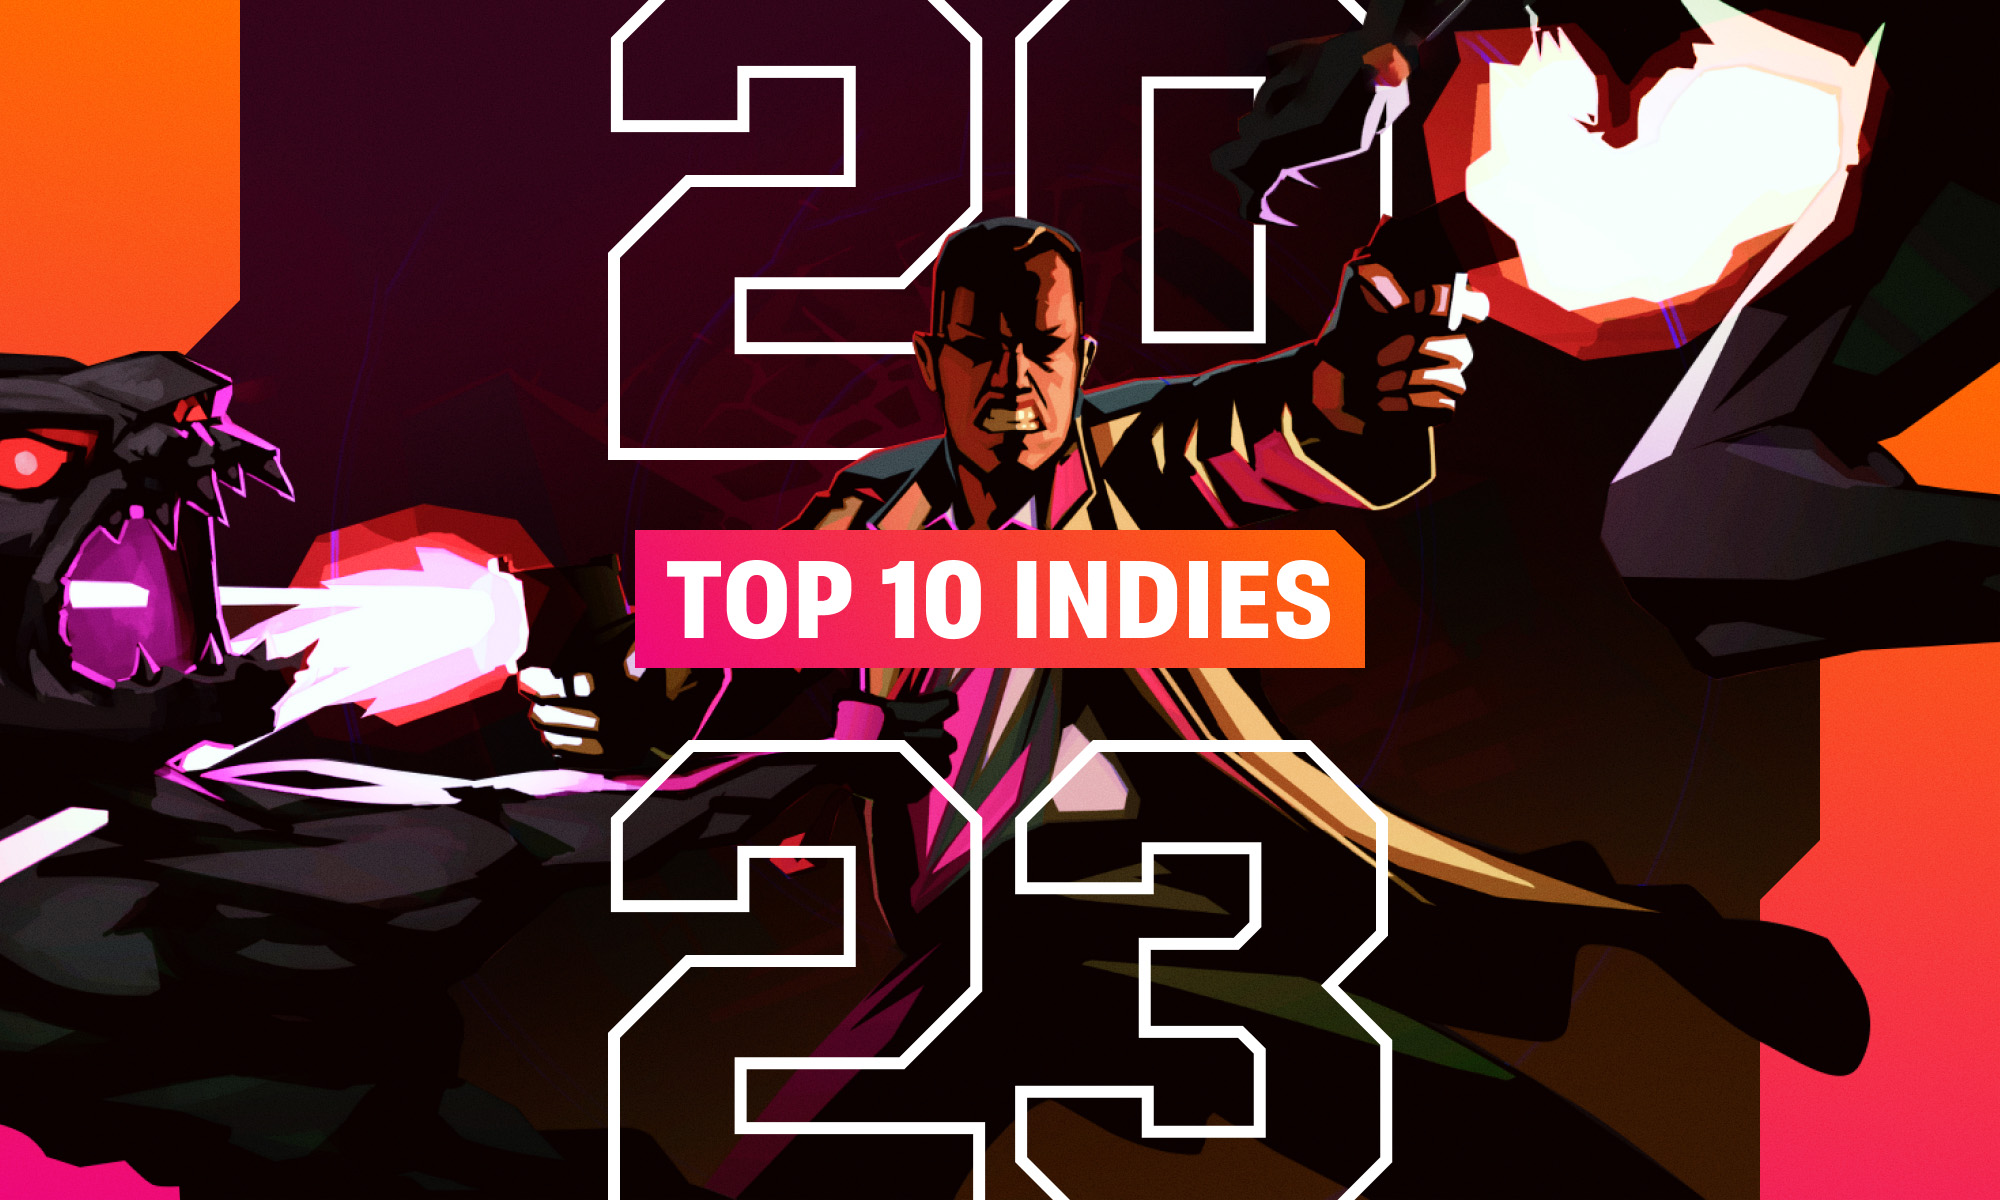 The main character of El Paso Elsewhere appears in front of a graphic that says Top 10 Indies.